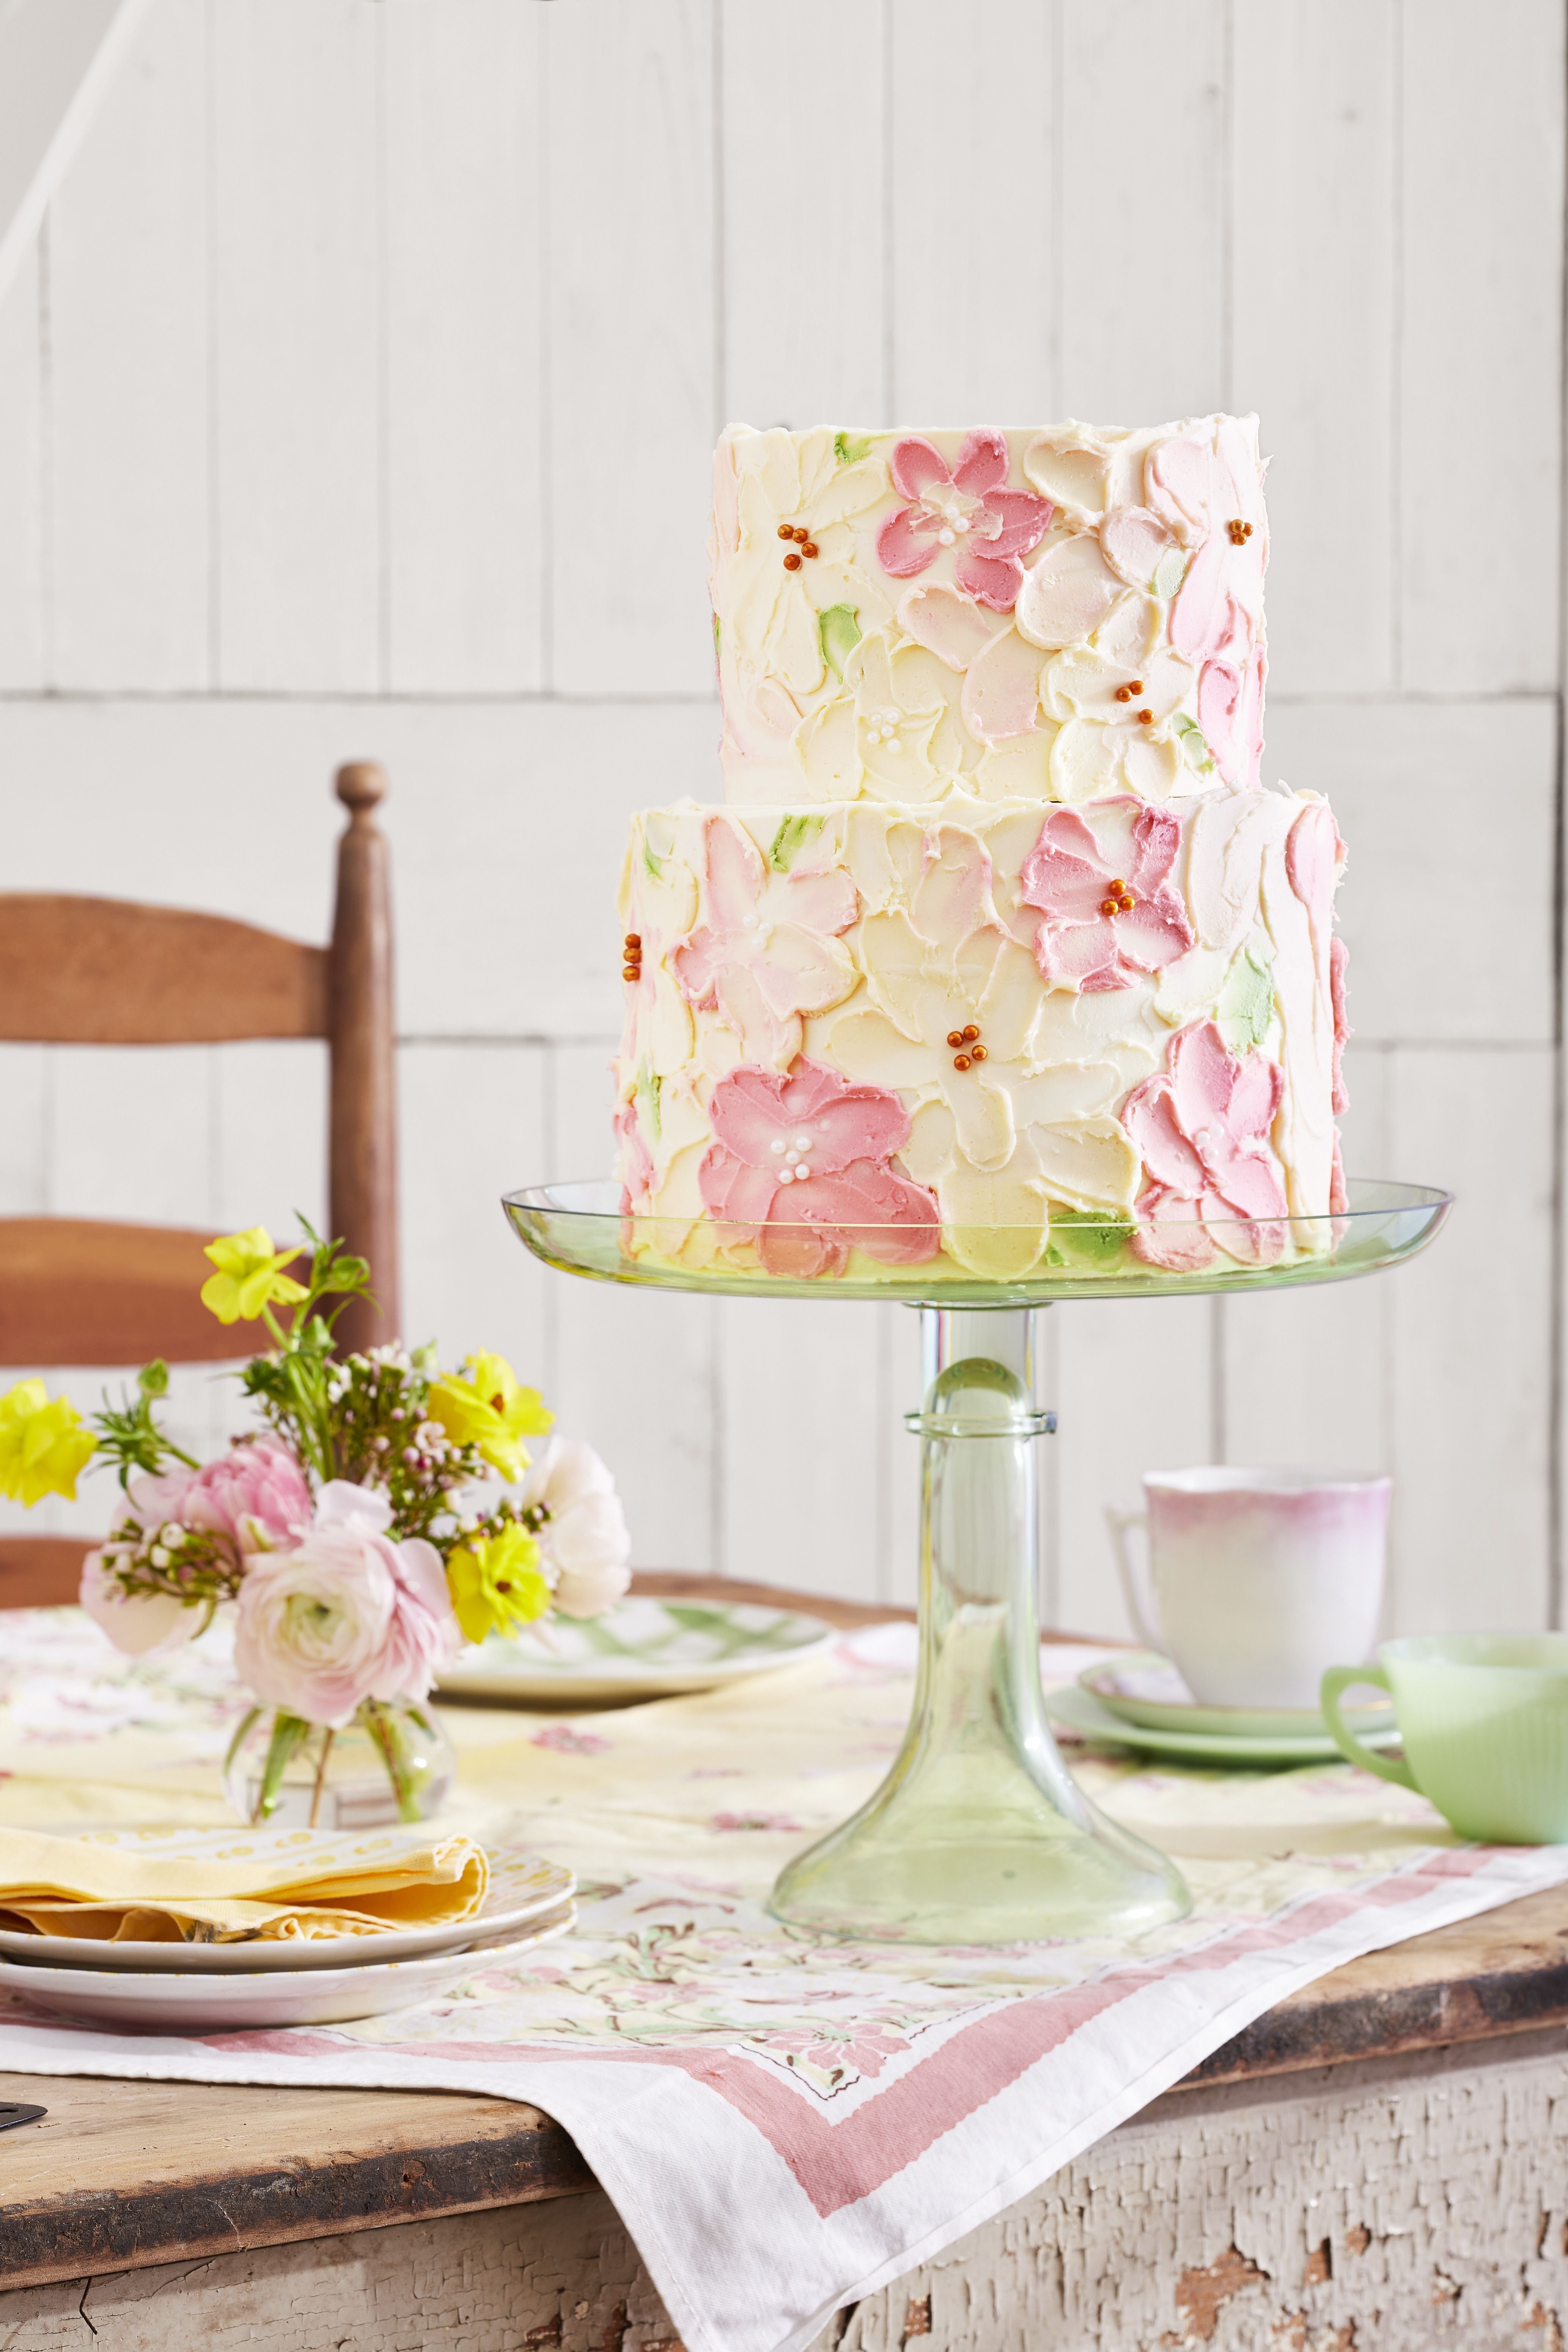 15 Beautiful Mother's Day Cake Ideas - Find Your Cake Inspiration